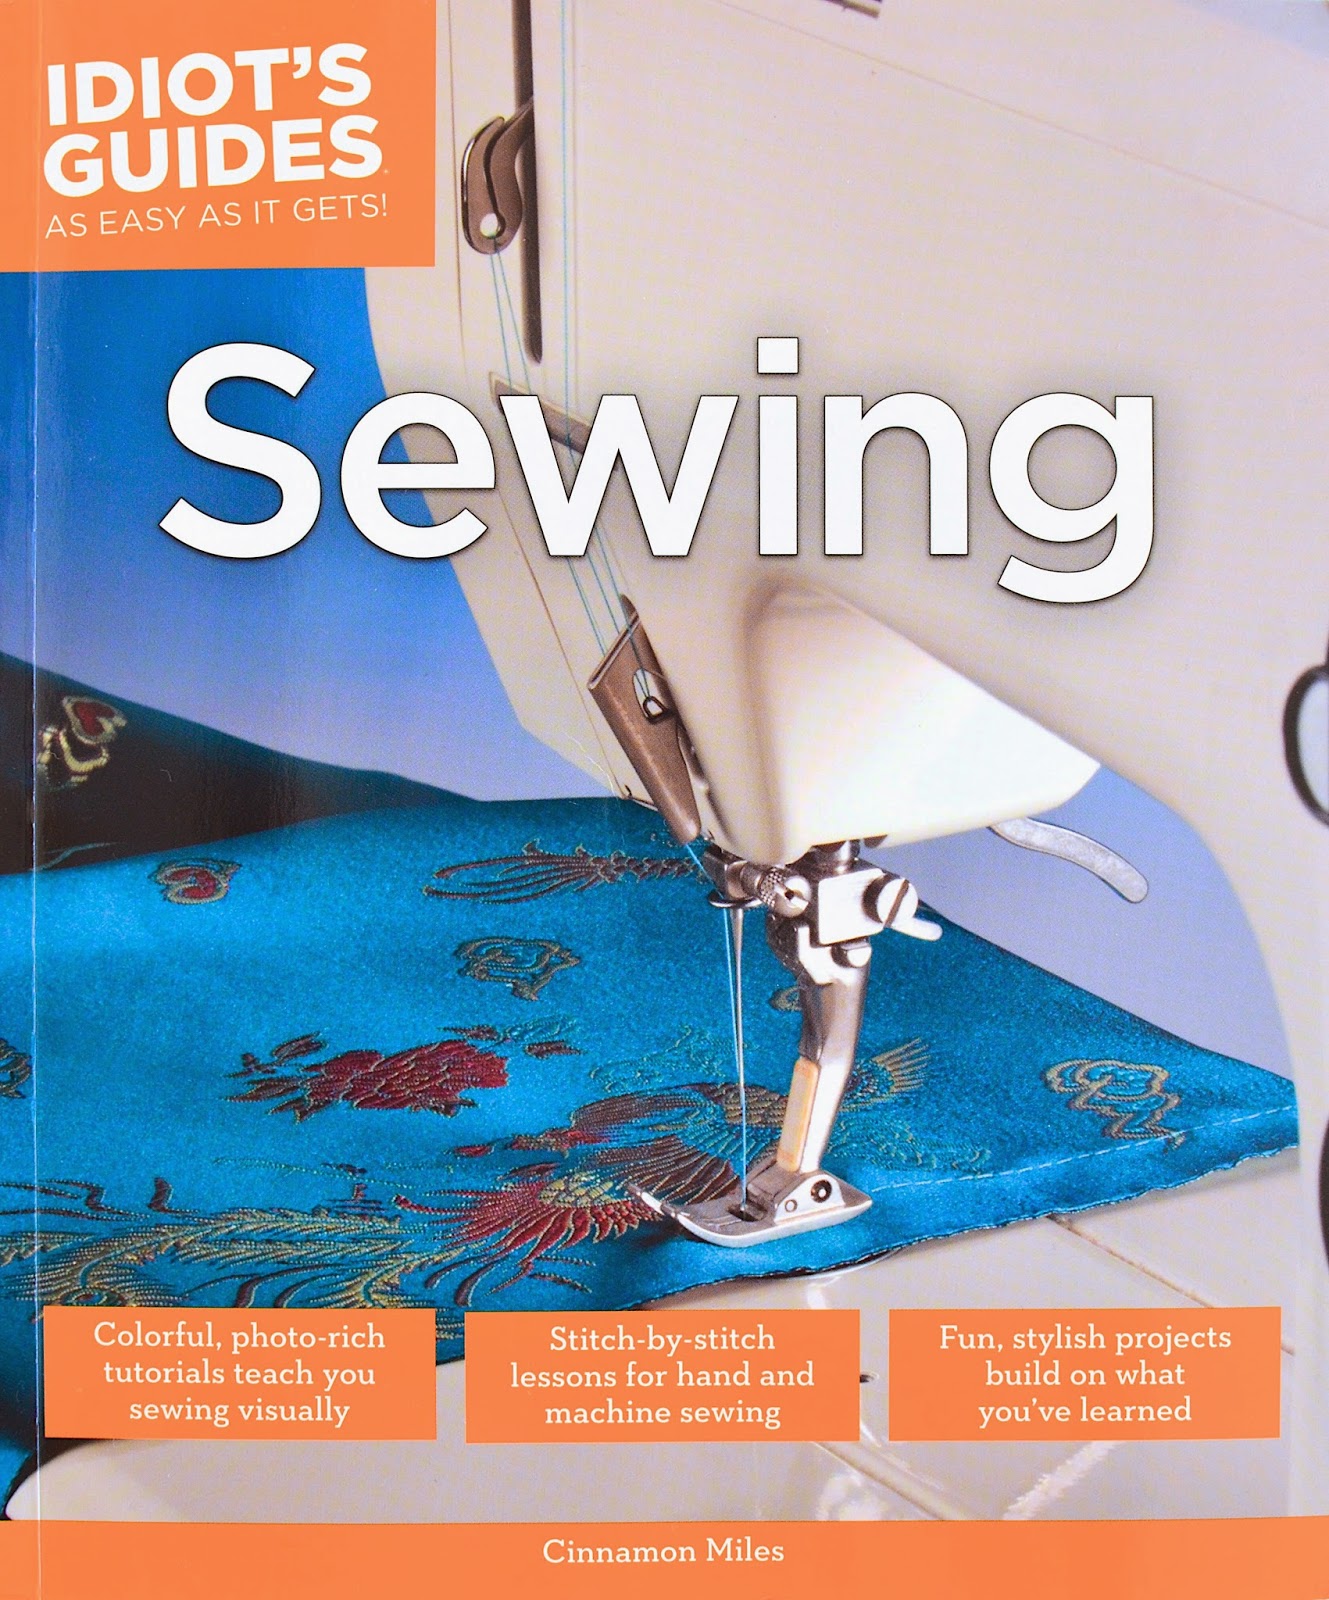 ikat bag: Idiot's Guides: Sewing - A Book Review And Giveaway!